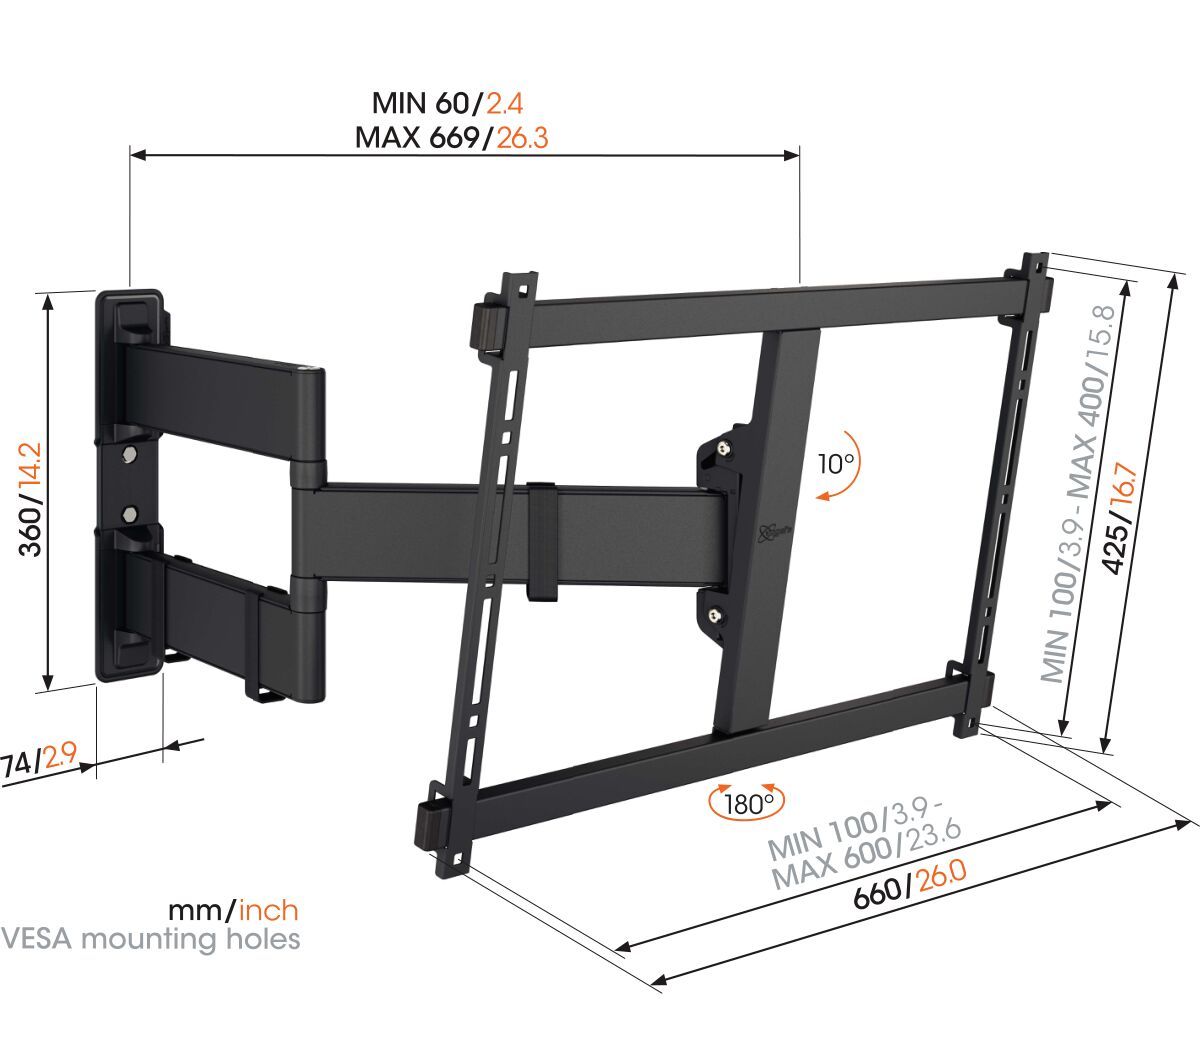 Vogel's TVM 3845 Full-Motion TV Wall Mount (black) - Suitable for 55 up to 100 inch TVs - Full motion (up to 180°) swivel - Tilt up to 10° - Dimensions